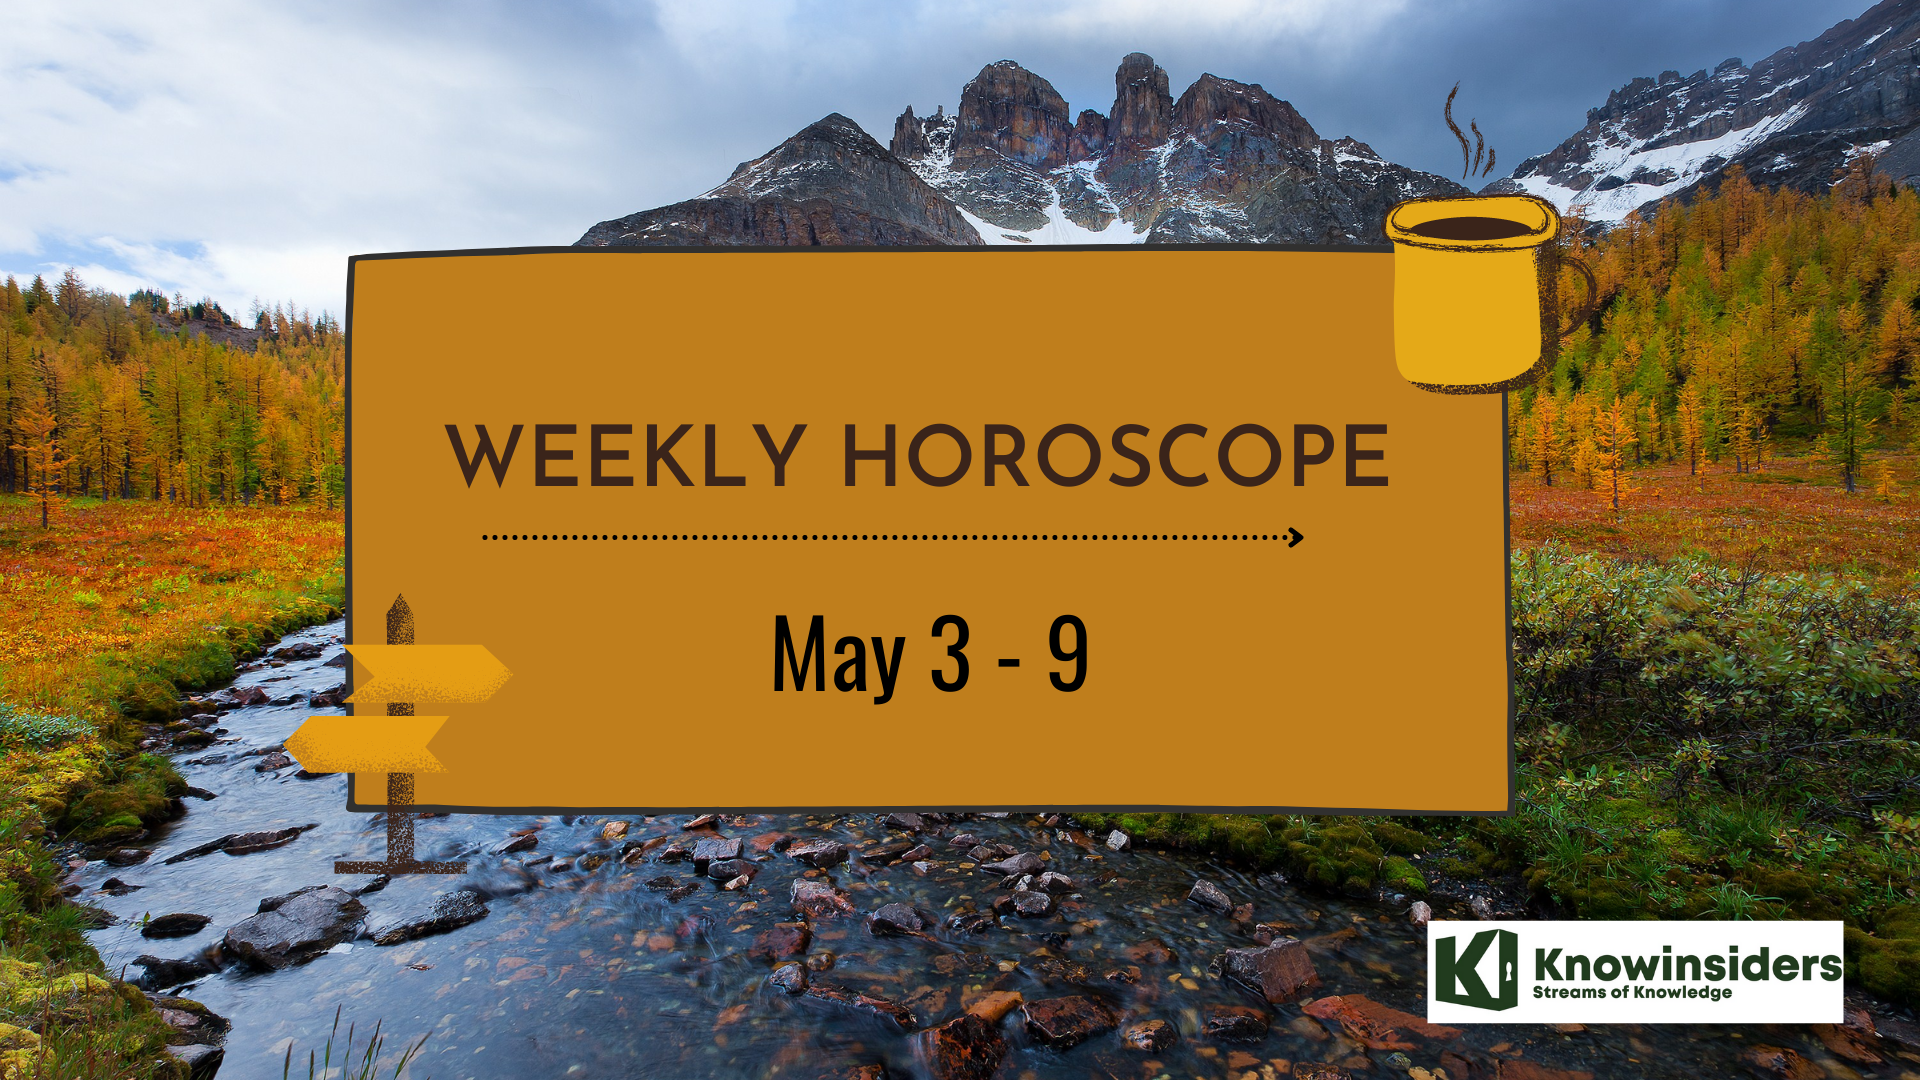 Weekly Horoscope (May 3-9): Predictions for Love, Money, Career and Health with12 Zodiac Signs